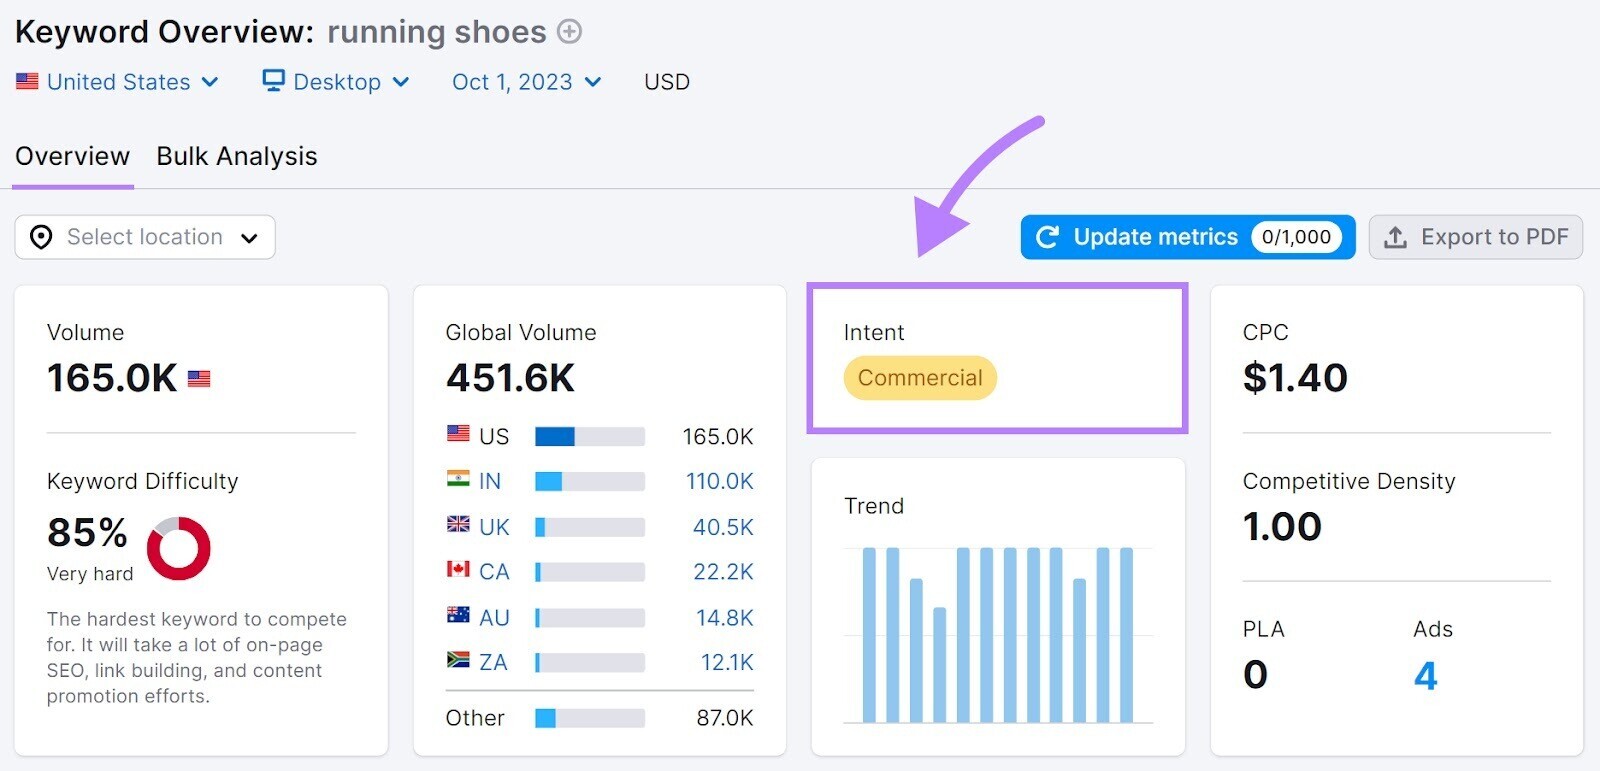 Keyword Overview report for "running shoes" with "Intent" metric highlighted